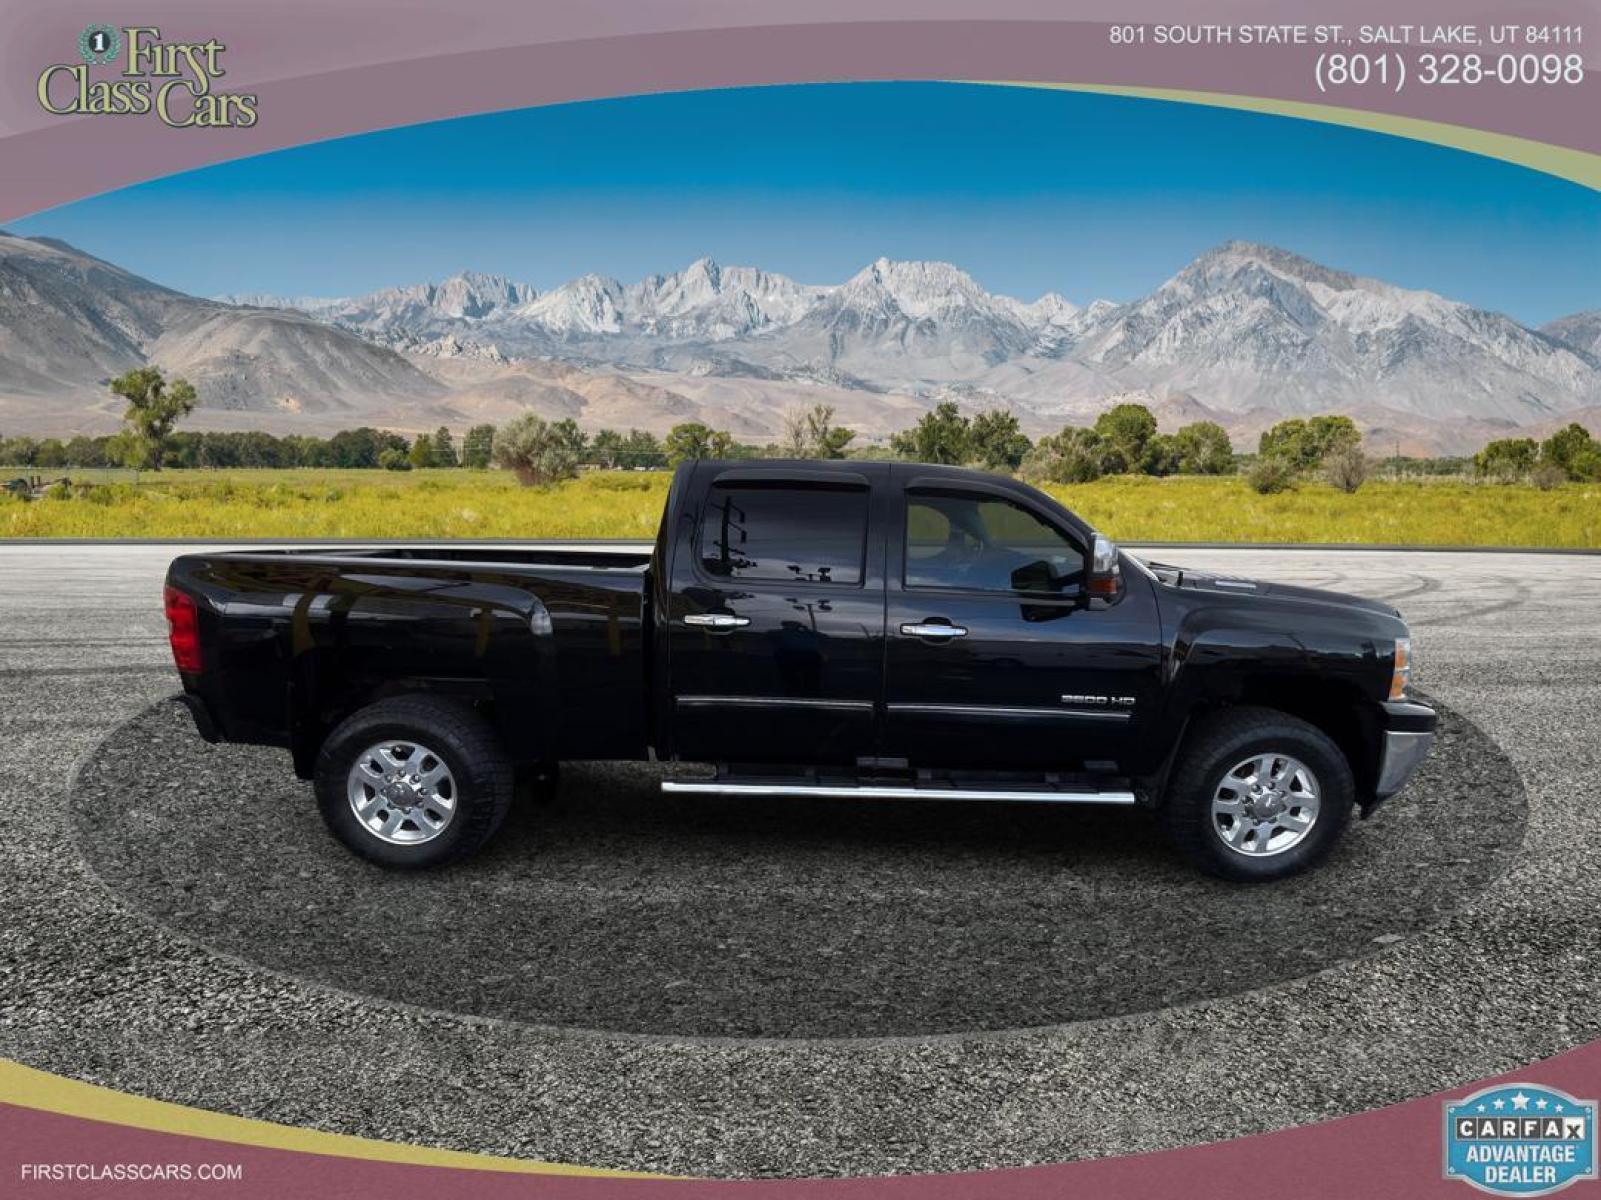 2012 Black /Black Chevrolet Silverado 3500HD (1GC4K1E81CF) , Allison Transmission transmission, located at 801 South State Street, Salt Lake City, UT, 84111, (801) 328-0098, 40.751953, -111.888206 - 3500HD LTZ DURAMAX DIESEL 6.6L, Loaded with features, 4x4, ALLISON TRANSMISSION, GREAT TIRES, BED LINER, LEATHER SEATS, BACKUP CAMERA, POWER SEATS, POWER LOCKS, POWER WINDOWS, Parking Sensors, AM/FM Aux input, Blutooth, GPS Navigation system, Rear Entertainment system, - Photo #2